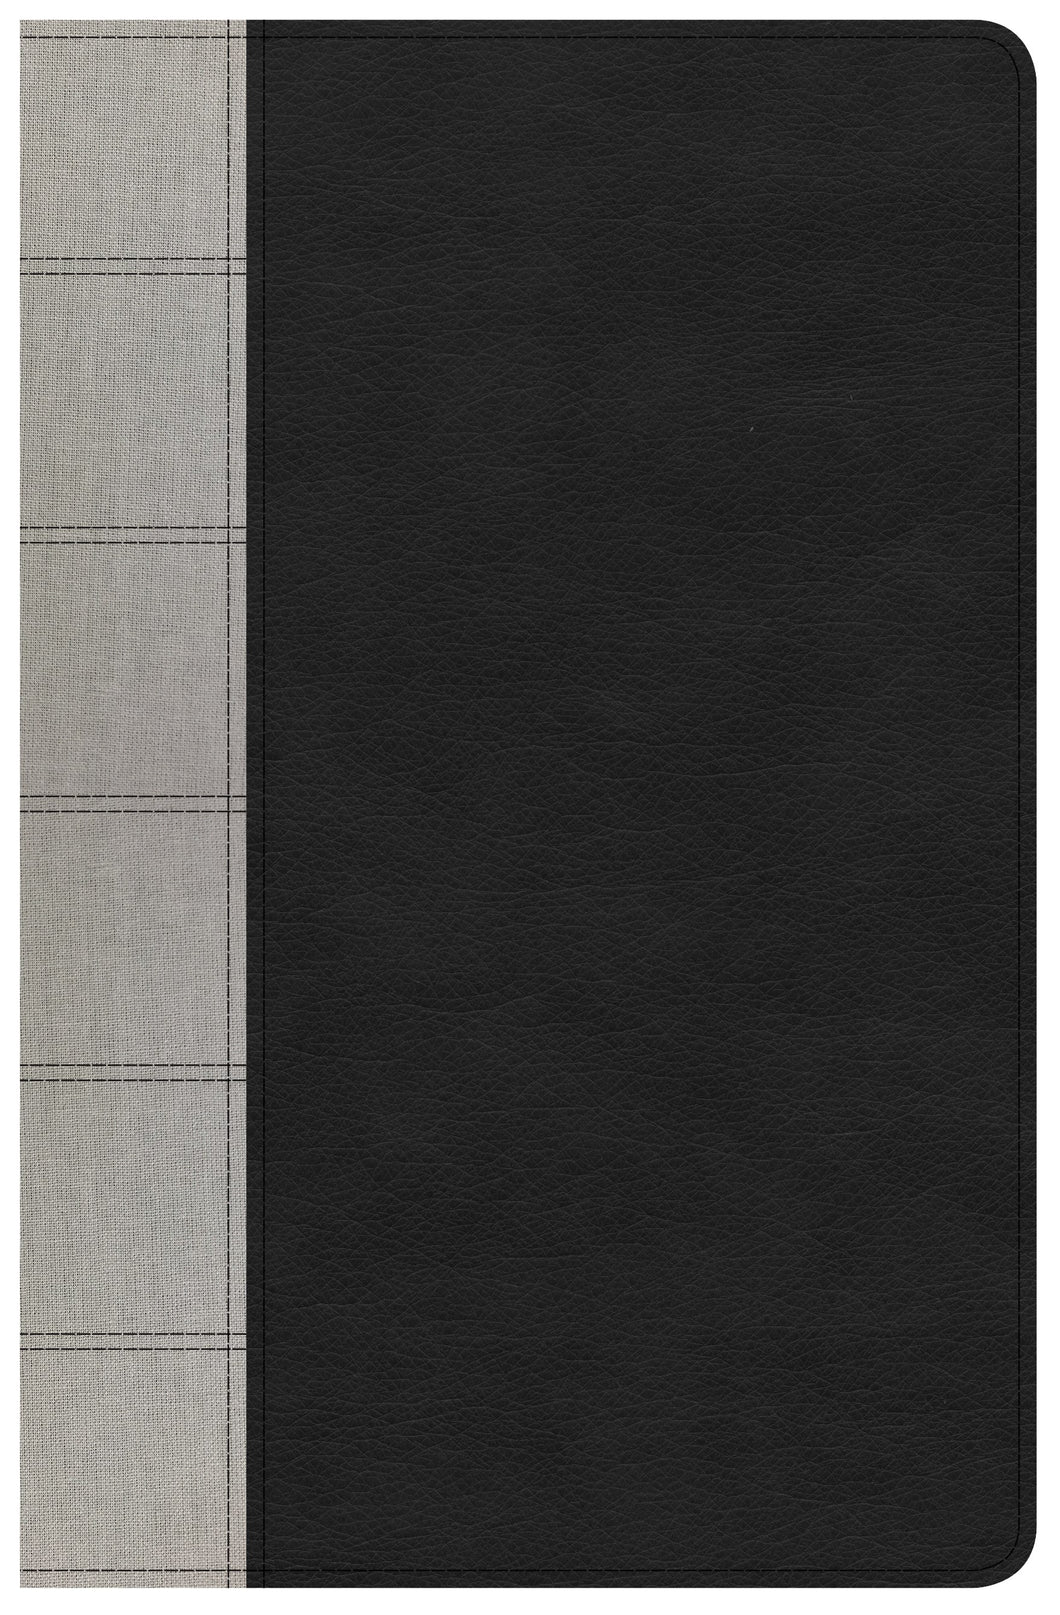 KJV Large Print Personal Size Reference Bible-Black/Gray Deluxe LeatherTouch